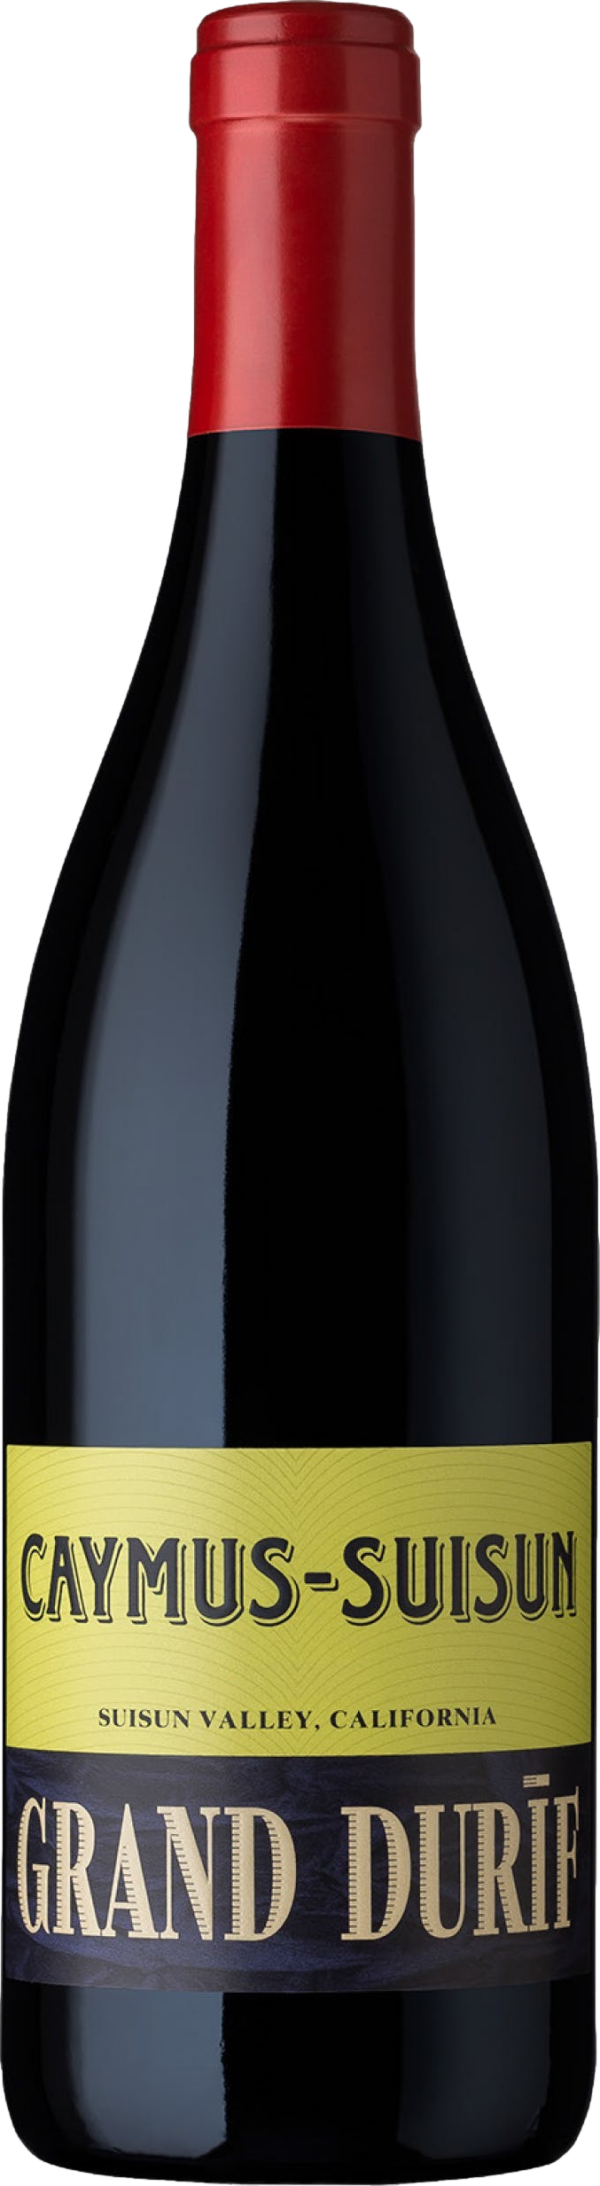 Product image of Caymus Suisun Grand Durif 2018 from 8wines